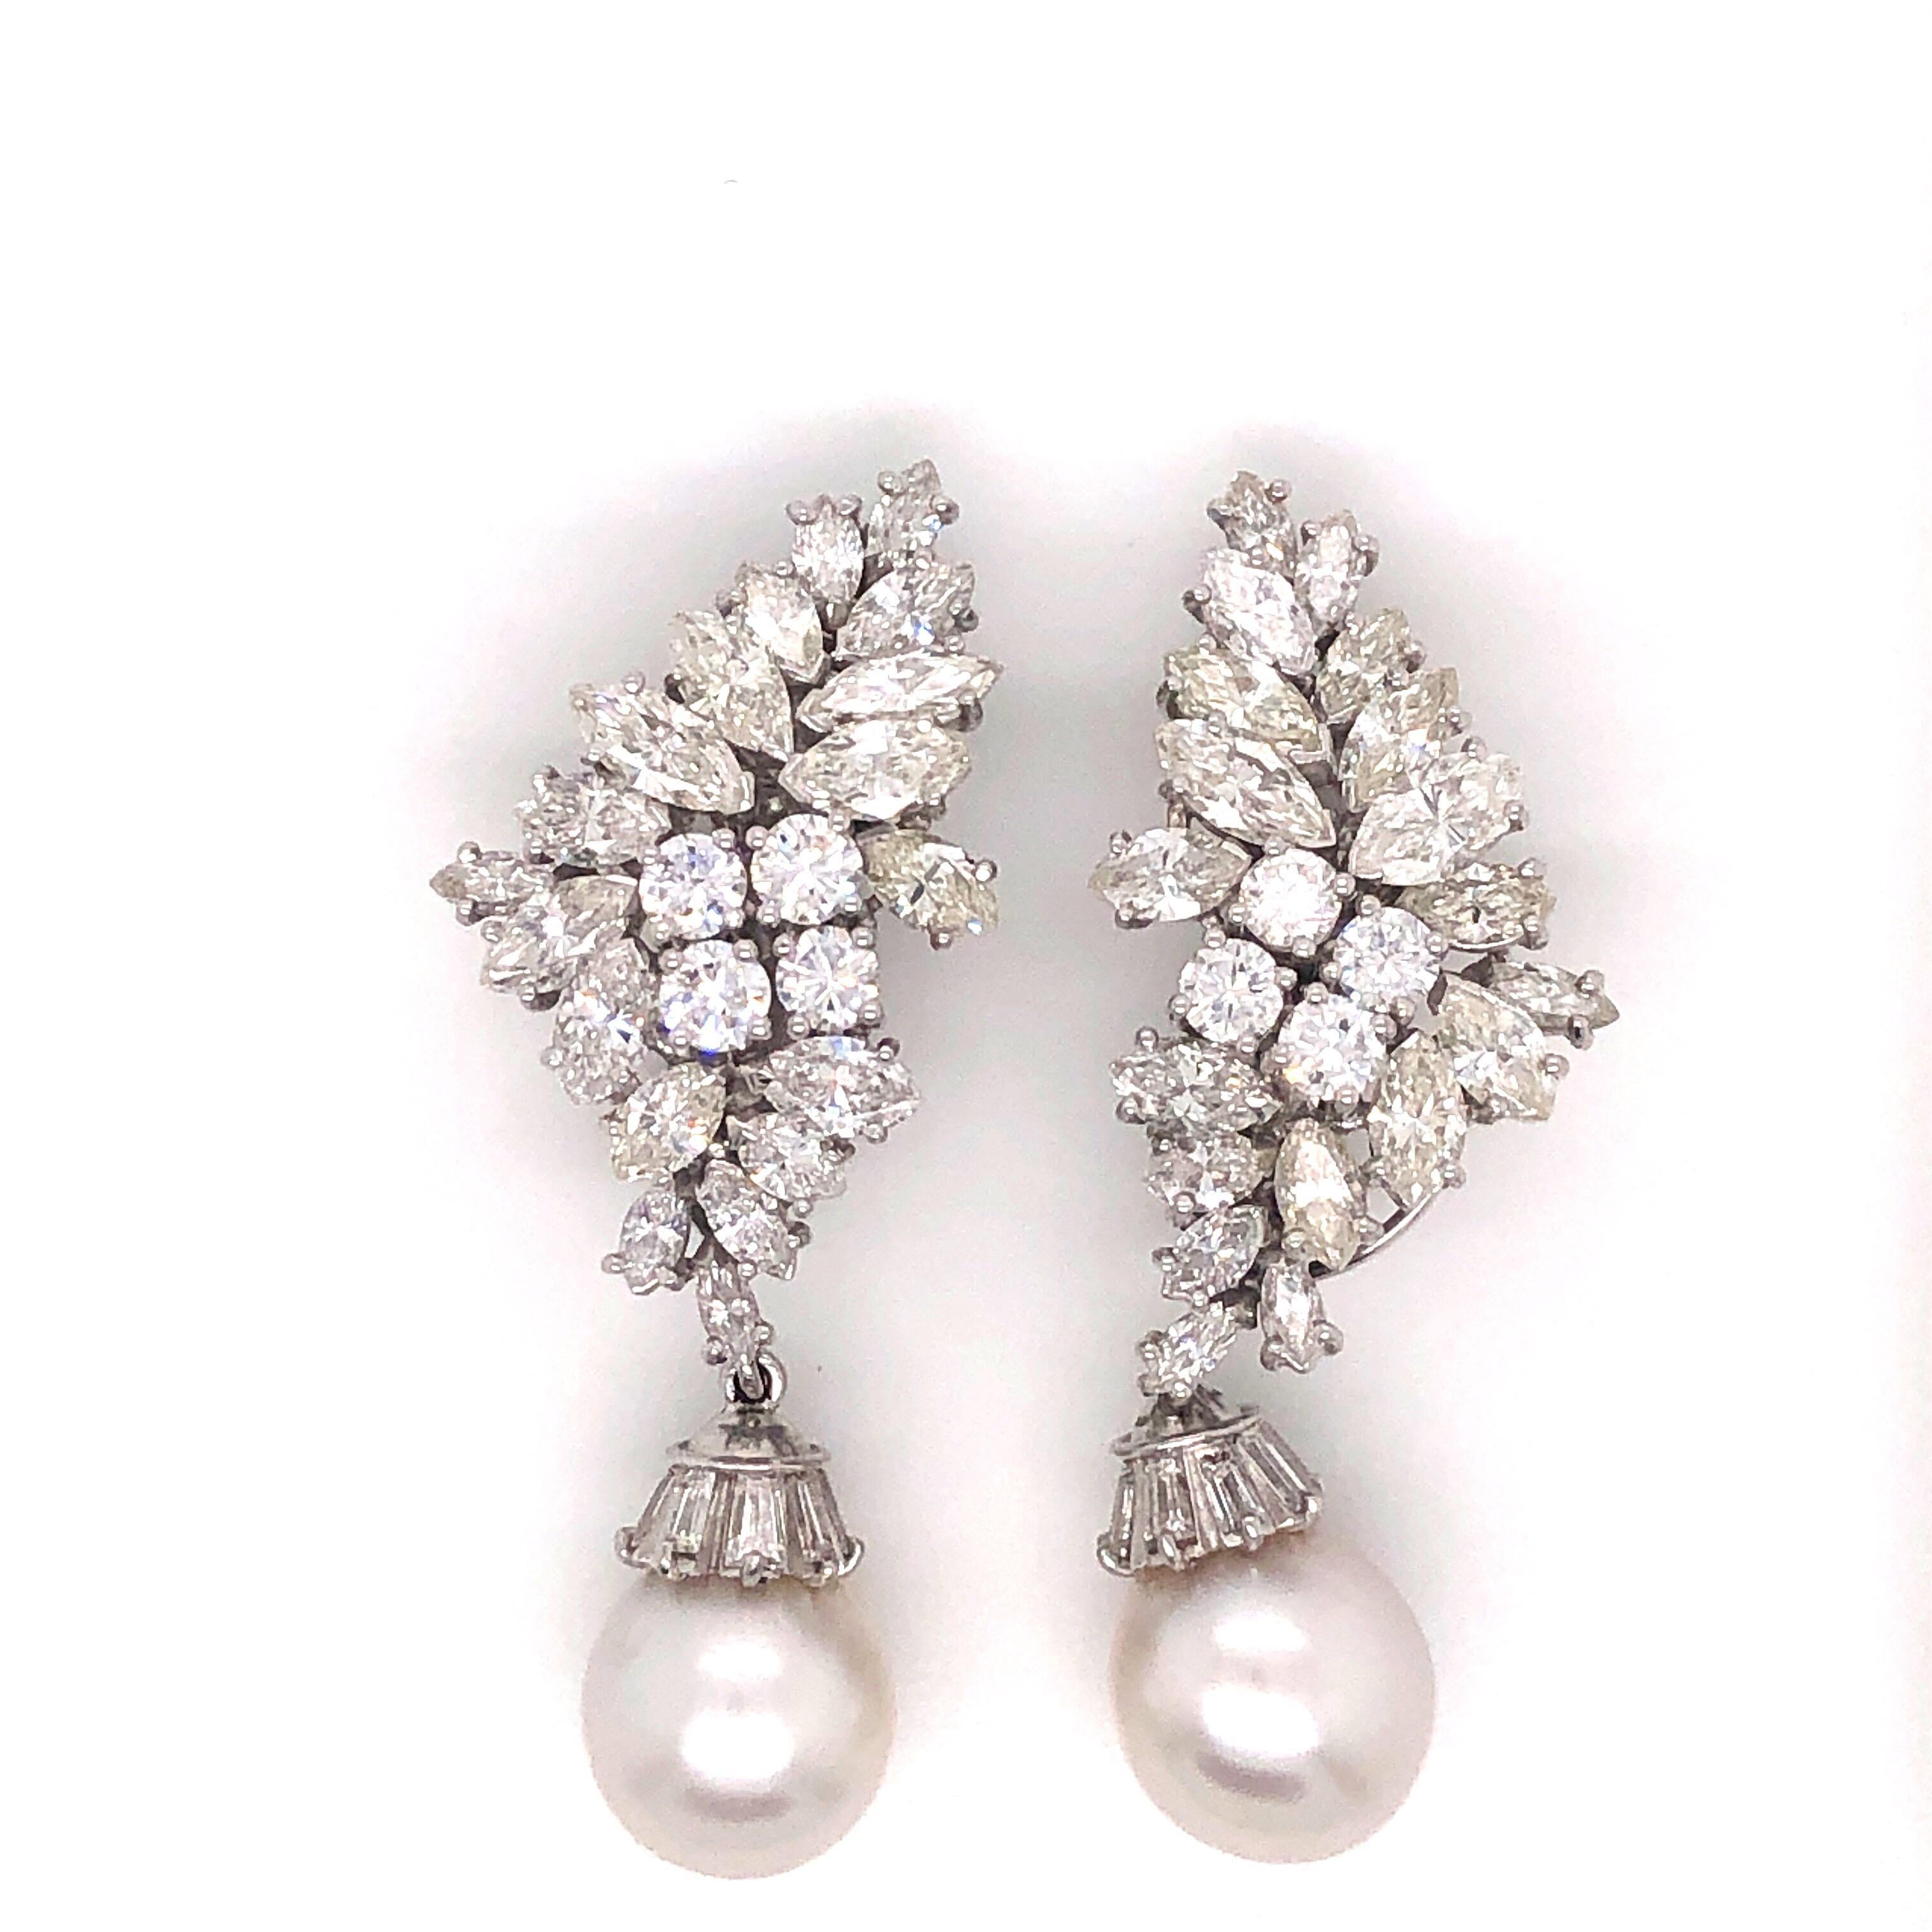 Vintage 10 Carat Diamond and Pearl Drop Convertible Earrings 18 Karat White Gold In Excellent Condition For Sale In Houston, TX